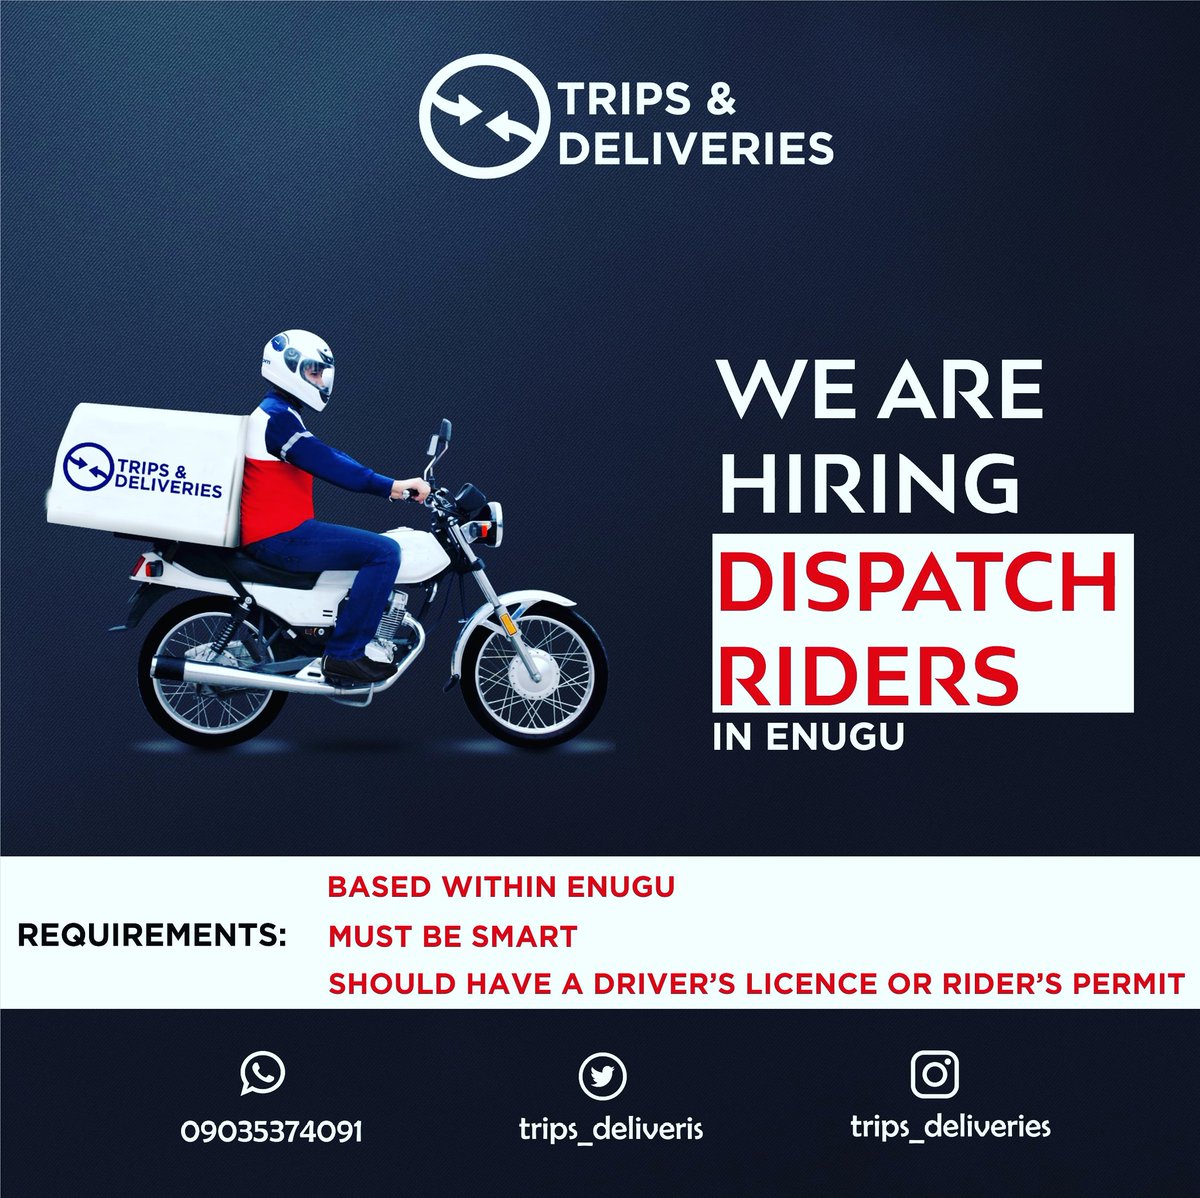 We are looking for dedicated, smart and loyal riders.
Call or send us a DM.
We will consider recommendations too...

#dispatchridersinenugu #dispatchrider